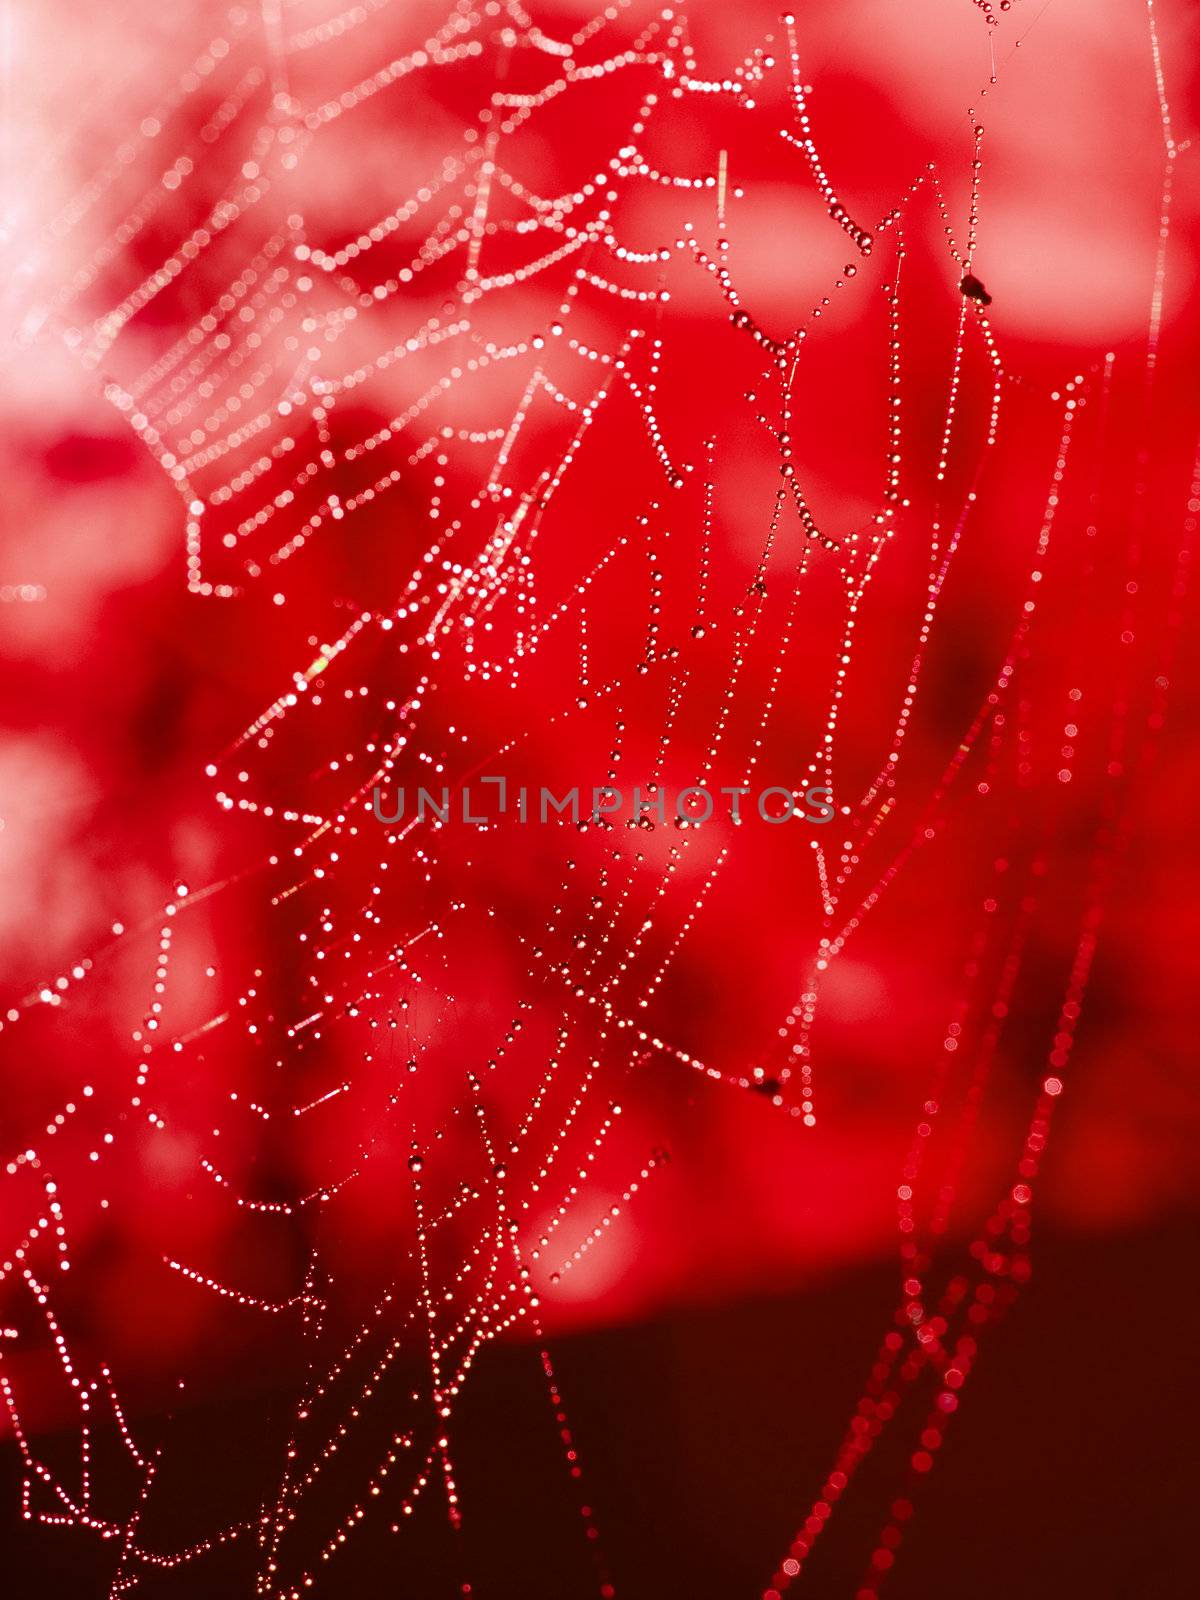 Redtoned Spider Web Covered with Sparkling Dew Drops